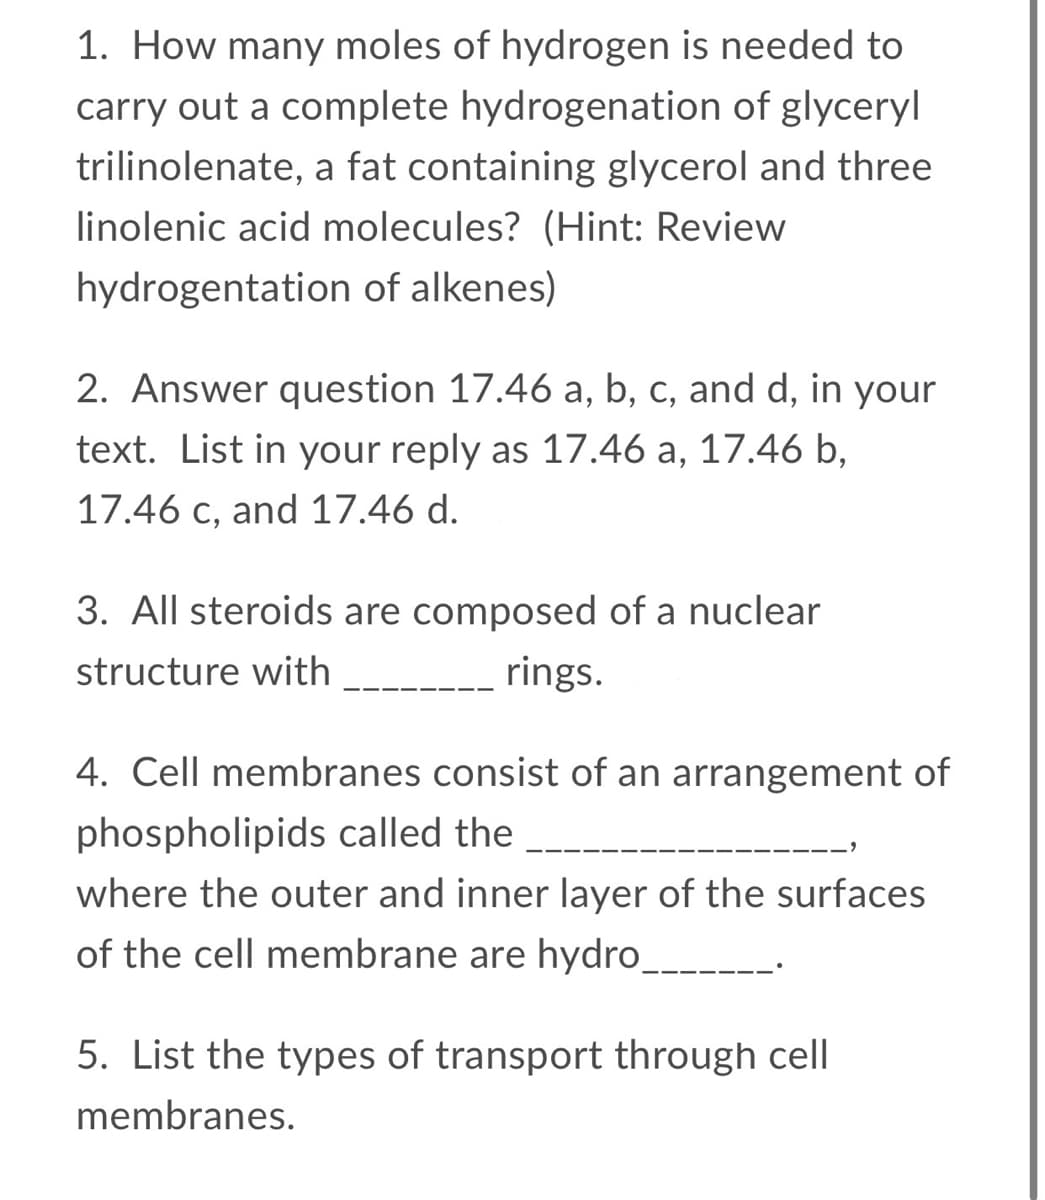 1. How many moles of hydrogen is needed to
carry out a complete hydrogenation of glyceryl
trilinolenate, a fat containing glycerol and three
linolenic acid molecules? (Hint: Review
hydrogentation of alkenes)
2. Answer question 17.46 a, b, c, and d, in your
text. List in your reply as 17.46 a, 17.46 b,
17.46 c, and 17.46 d.
3. All steroids are composed of a nuclear
structure with
rings.
4. Cell membranes consist of an arrangement of
phospholipids called the
where the outer and inner layer of the surfaces
of the cell membrane are hydro
5. List the types of transport through cell
membranes.
